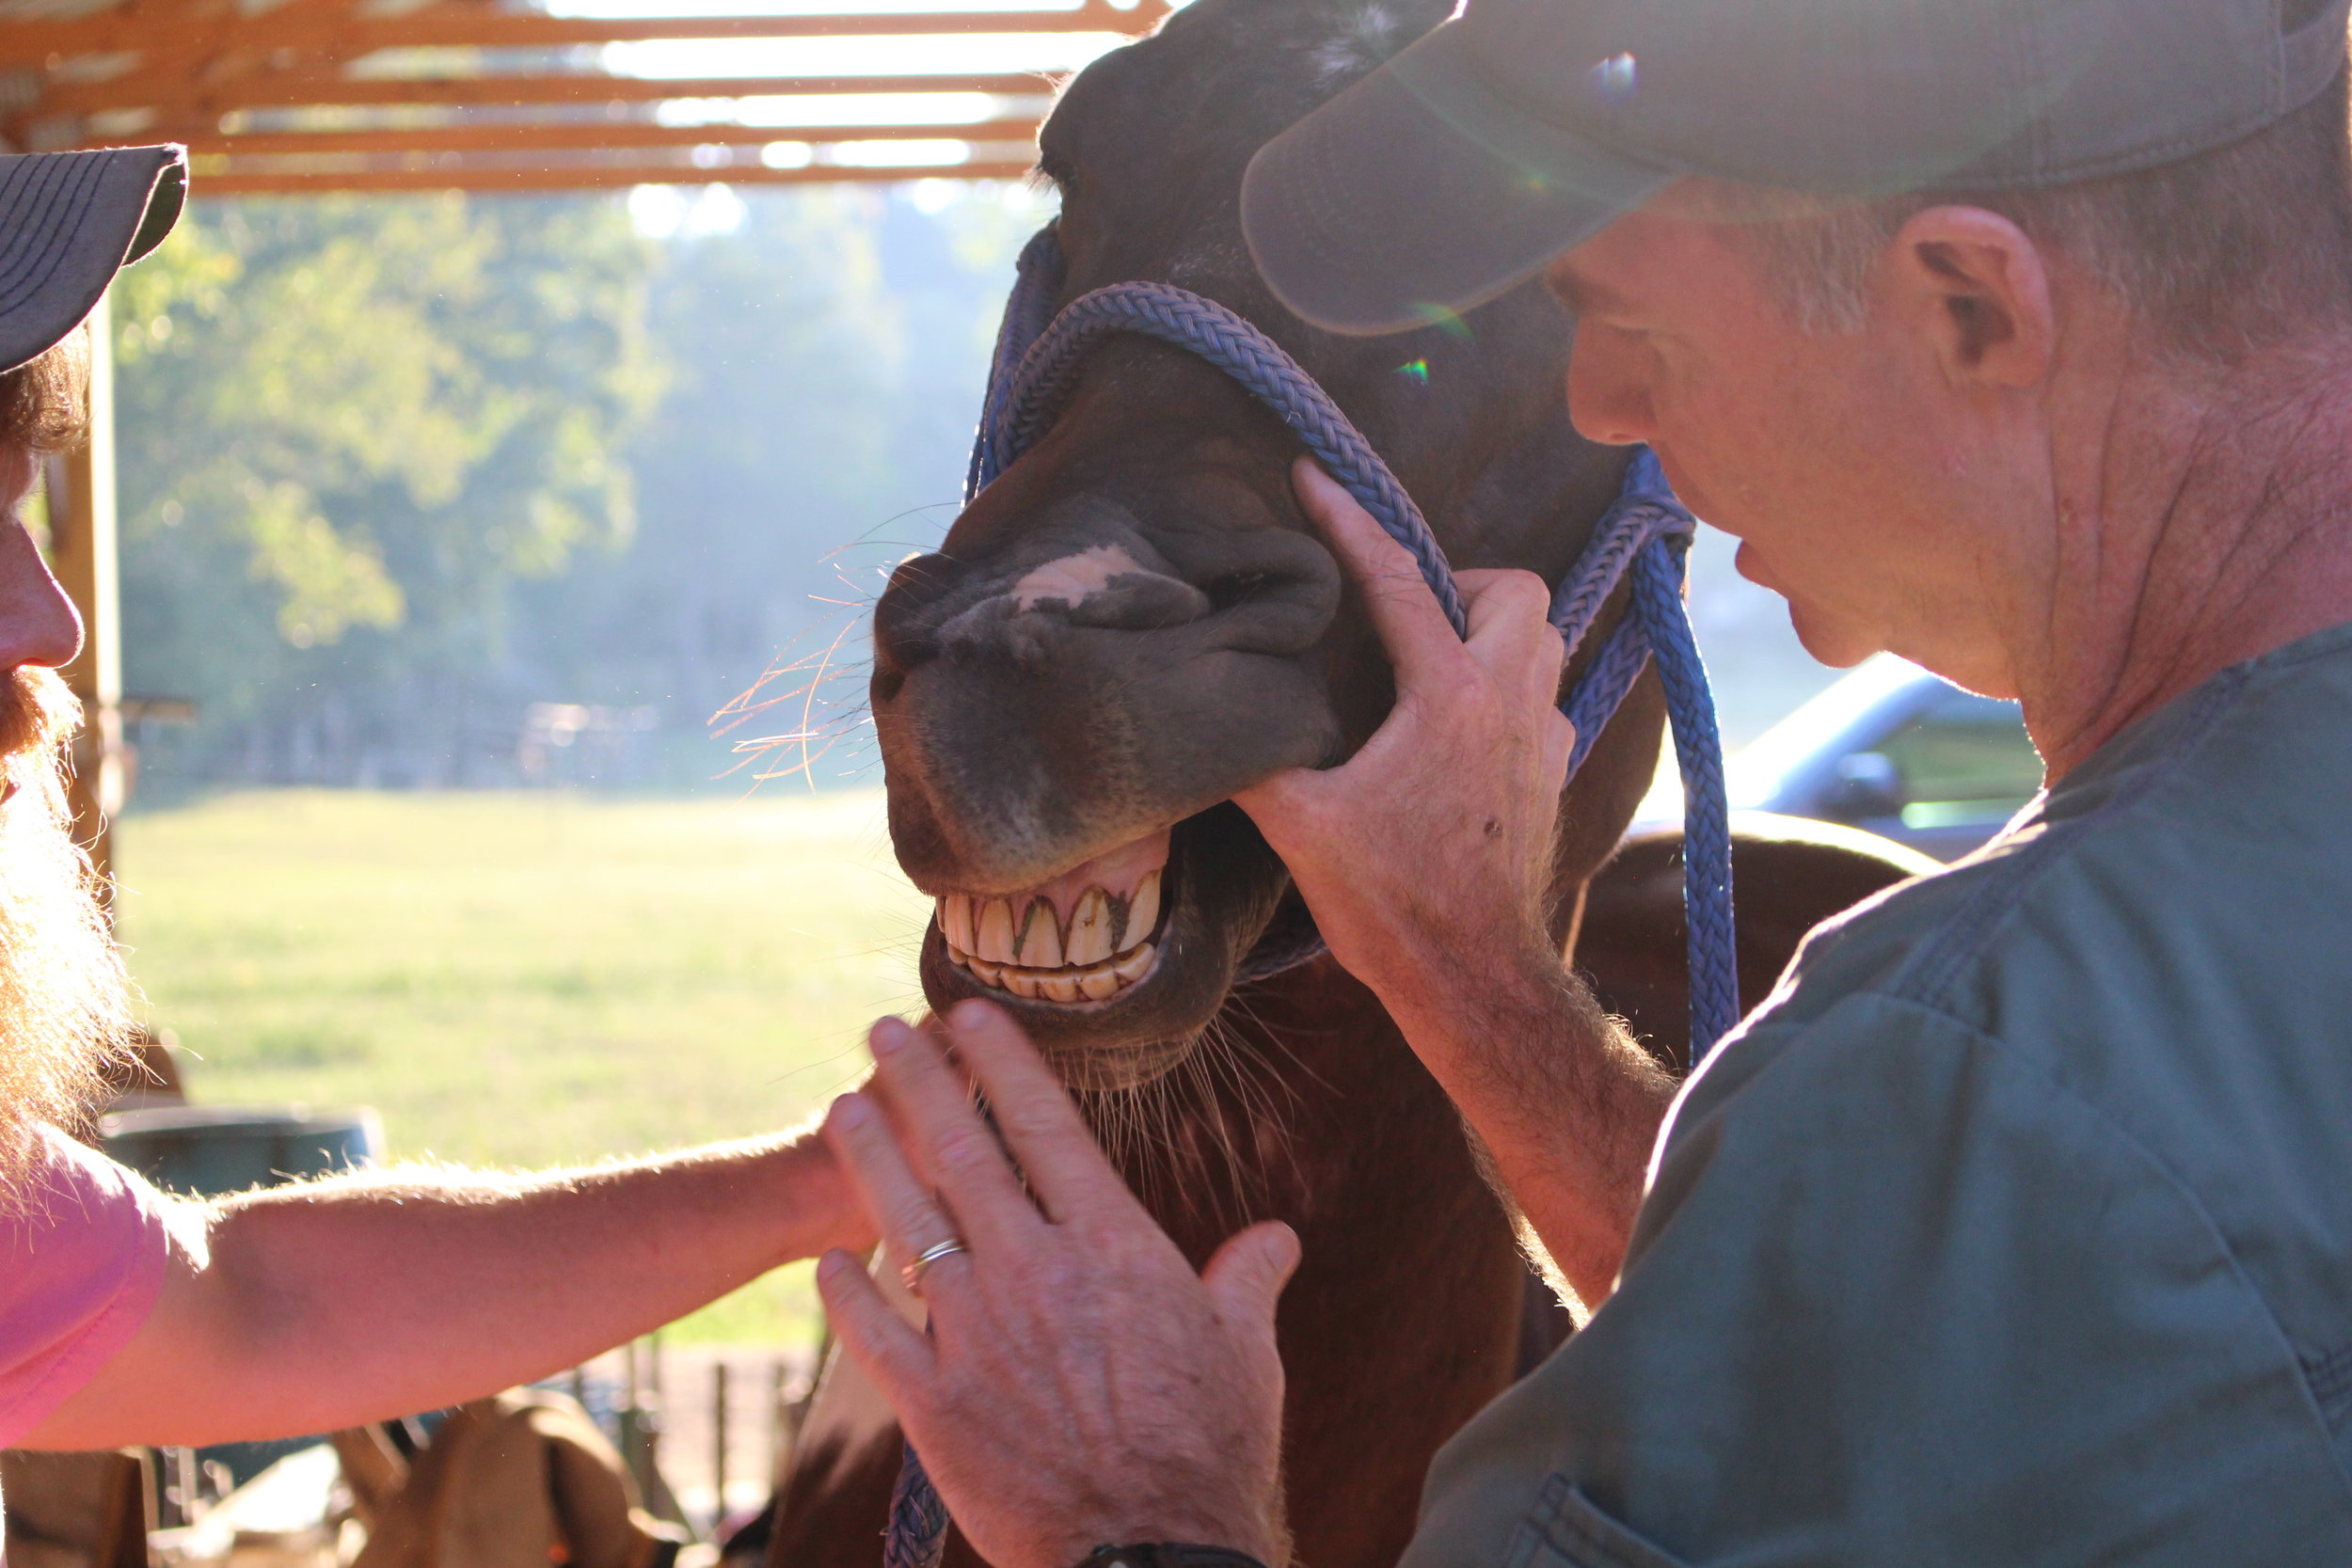 A class held at BWFA headquarters involving the study, diagnosis, prevention, and treatment of diseases, disorders and conditions of the oral cavity in a horse.